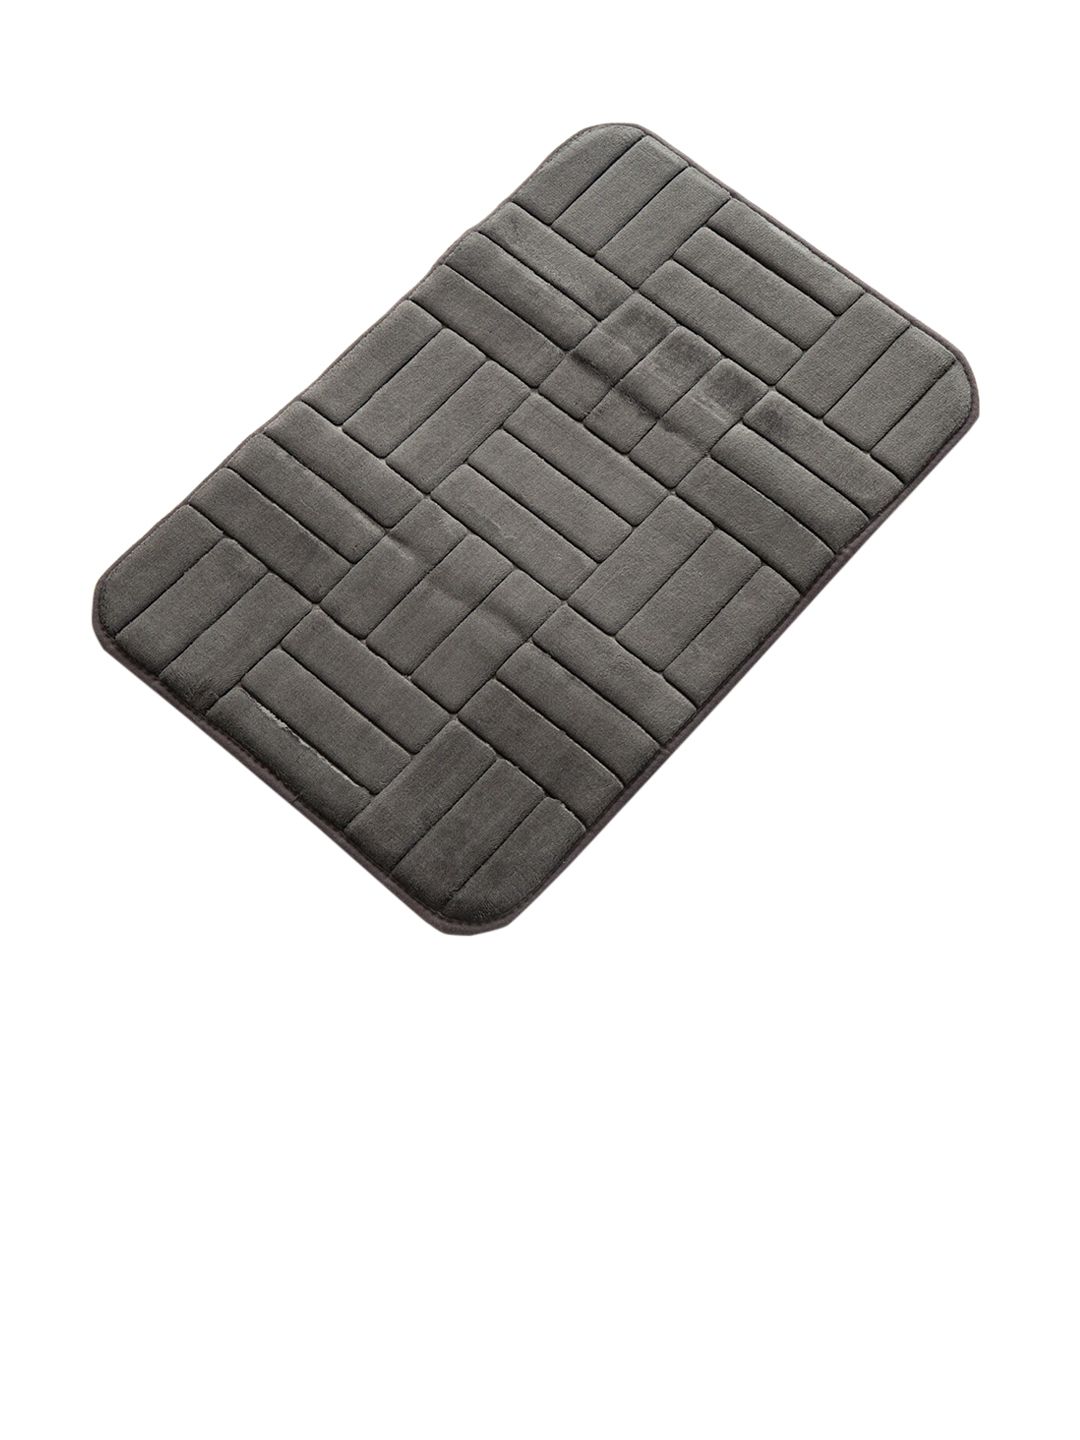 Home Centre Grey Buttercup Embossed Rectangular Bath Rug Price in India